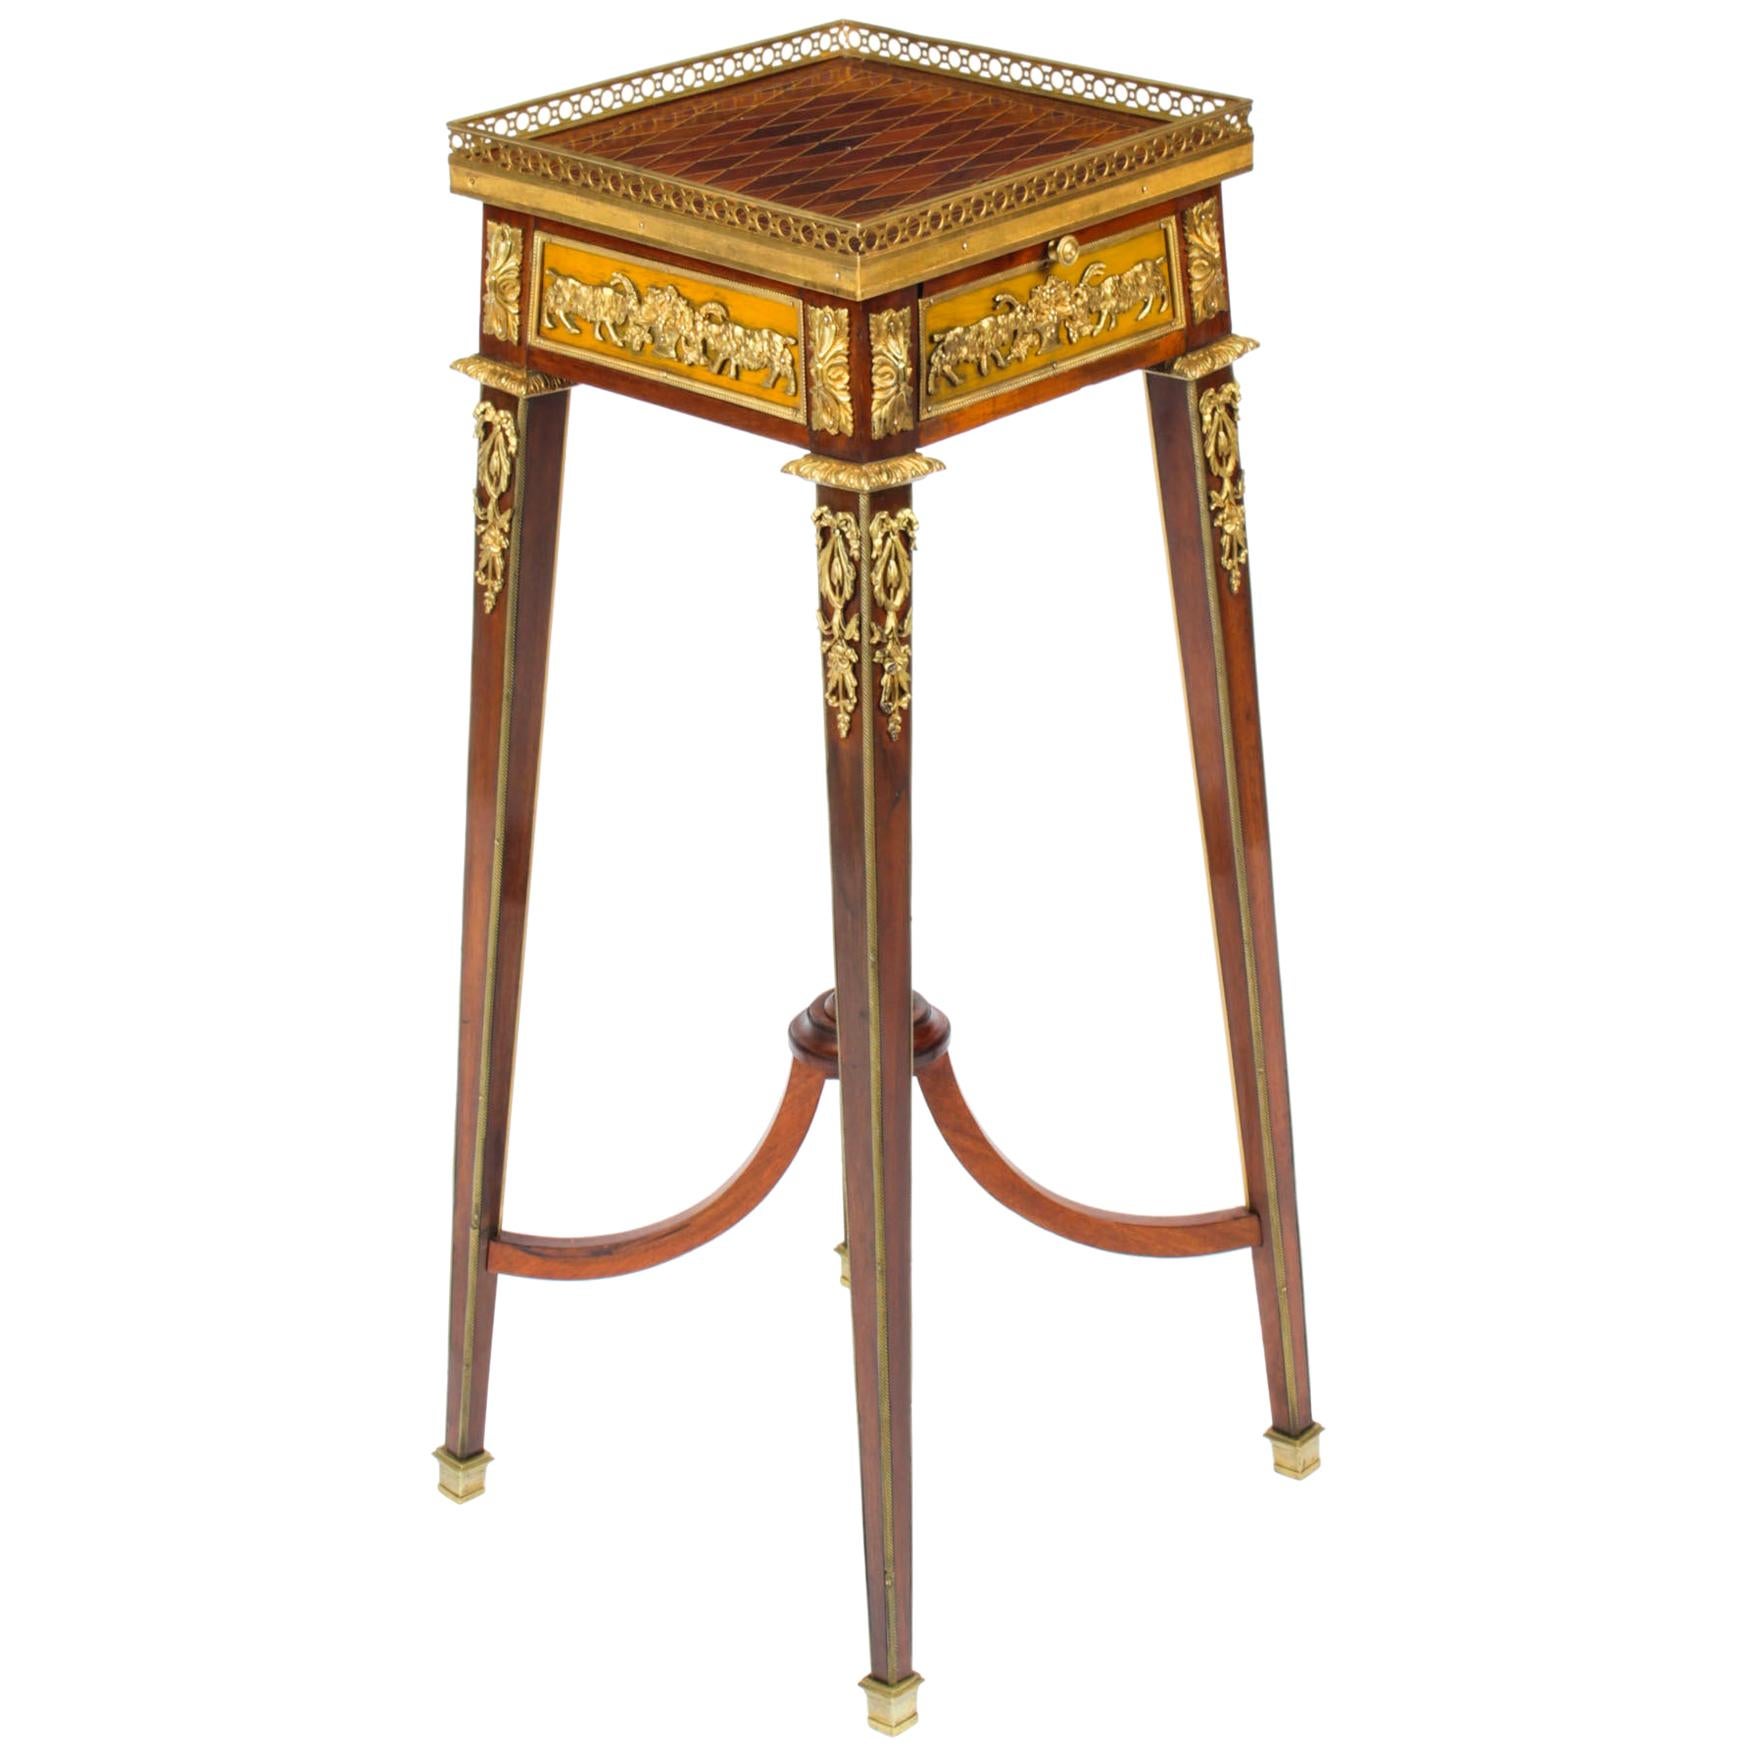 Antique French Parquetry Ormolu Mounted Stand Att François Linke, 19th Century